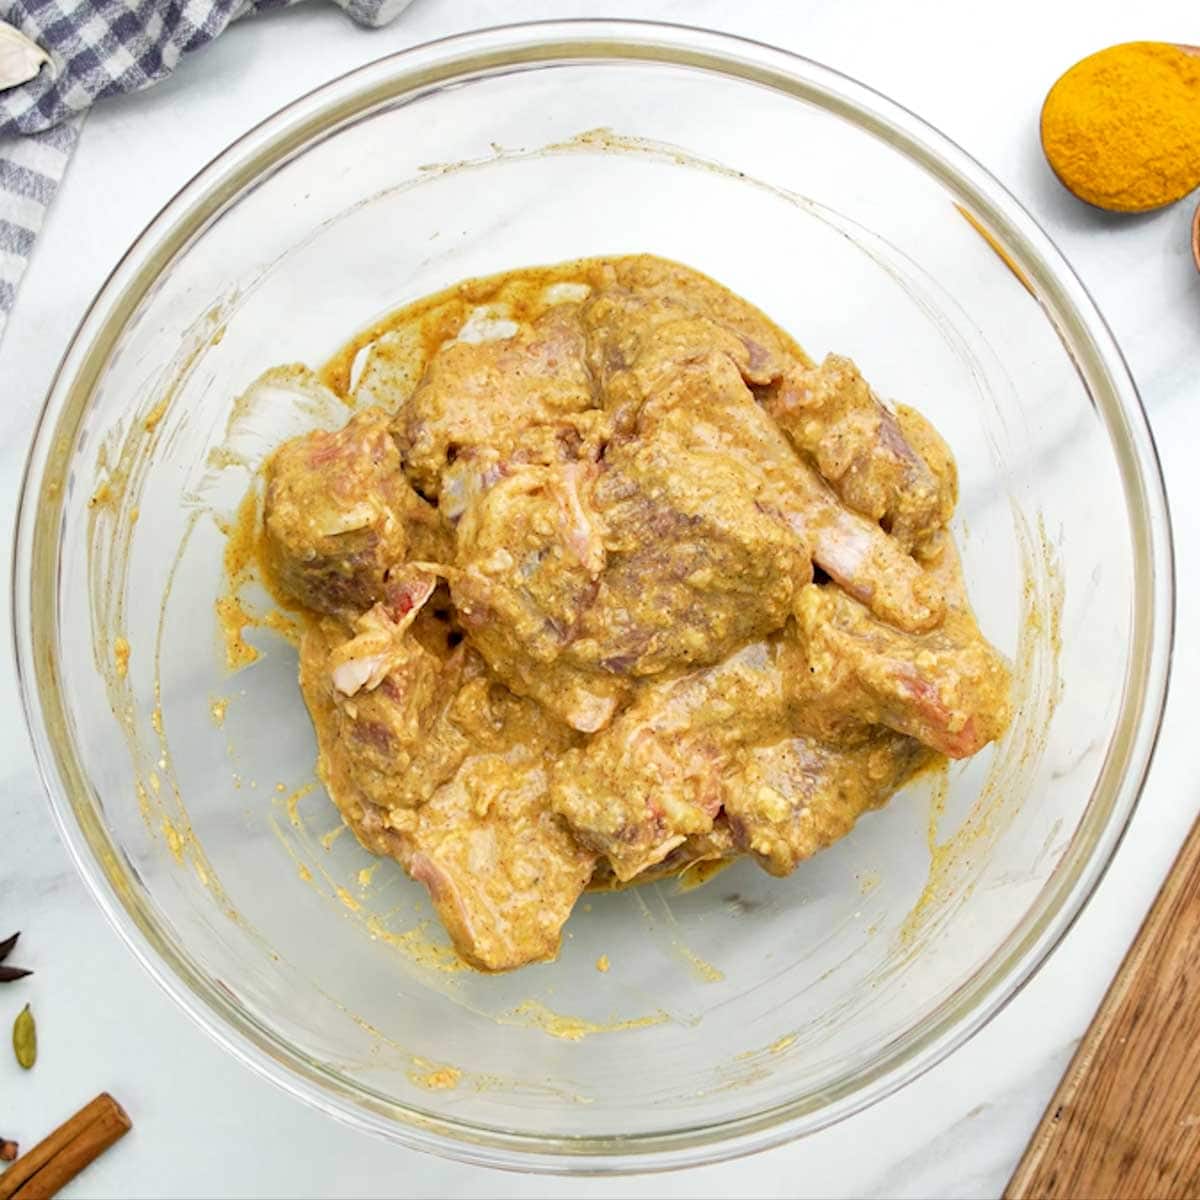 Mutton pieces marinating in a creamy yogurt sauce with ginger, garlic, chili powder, and other spices.